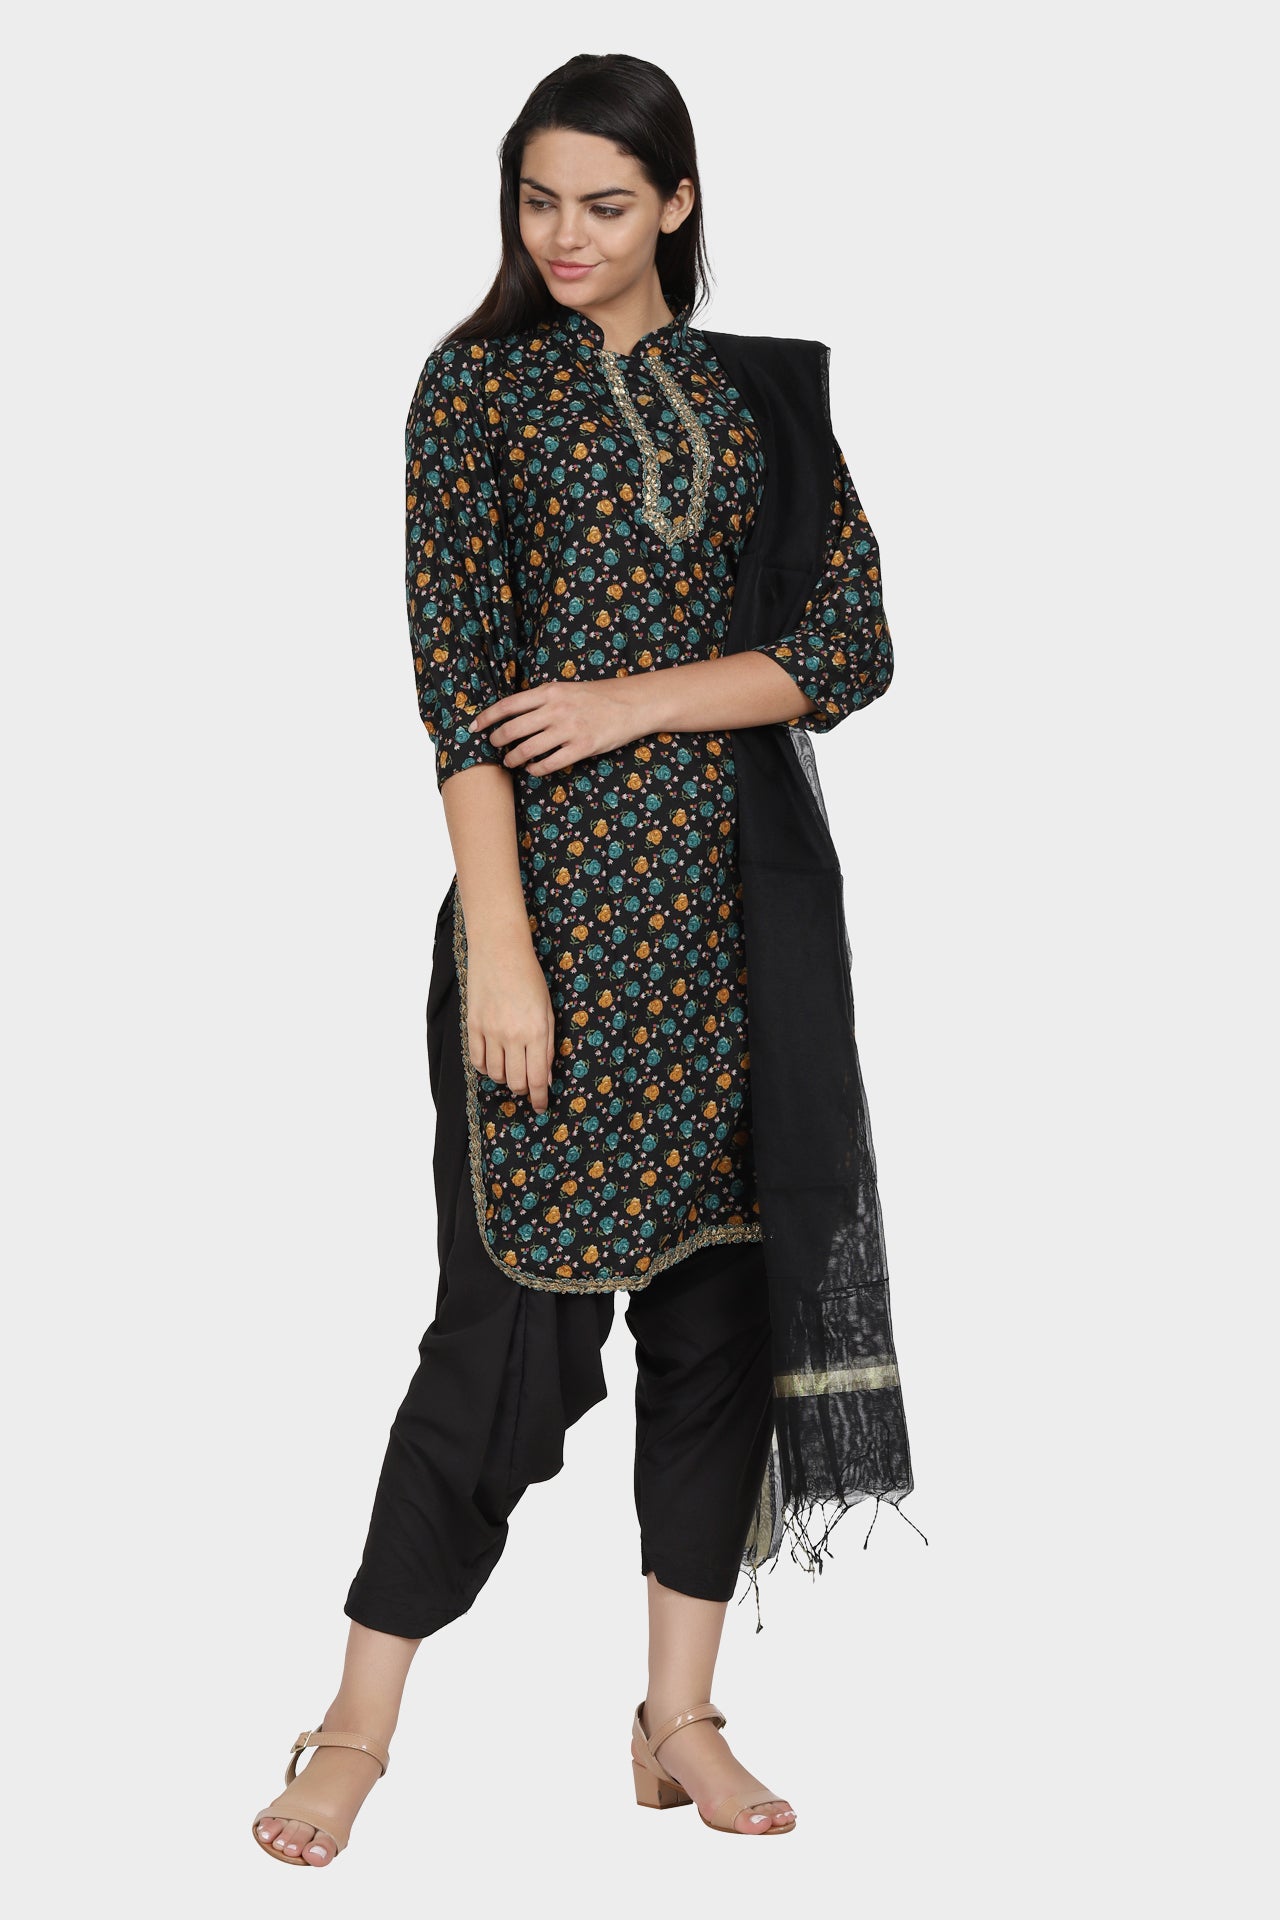 Black Floral Print Blended Kurta with Ethnic Lace Detailing